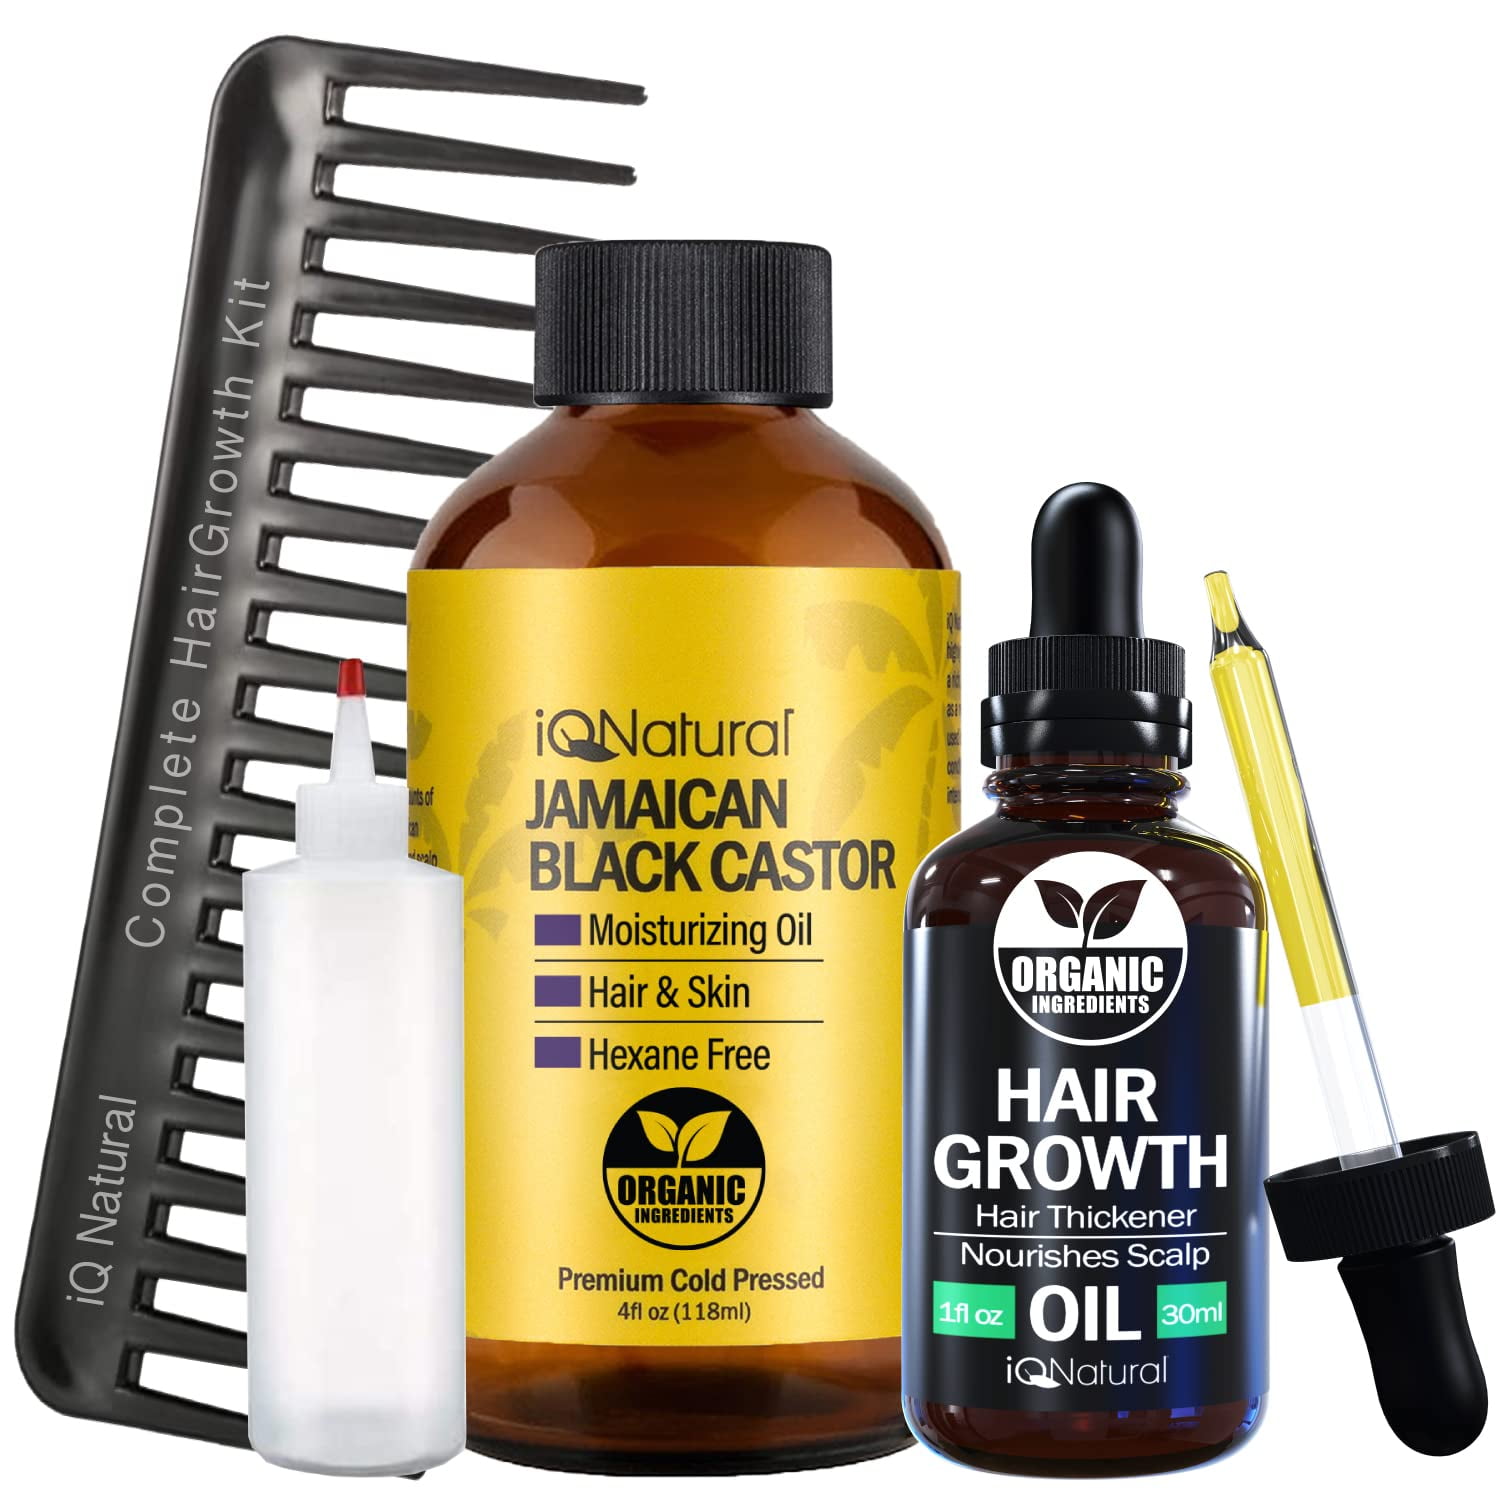 Which Is The Best Oil For Hair Growth And Thickness?